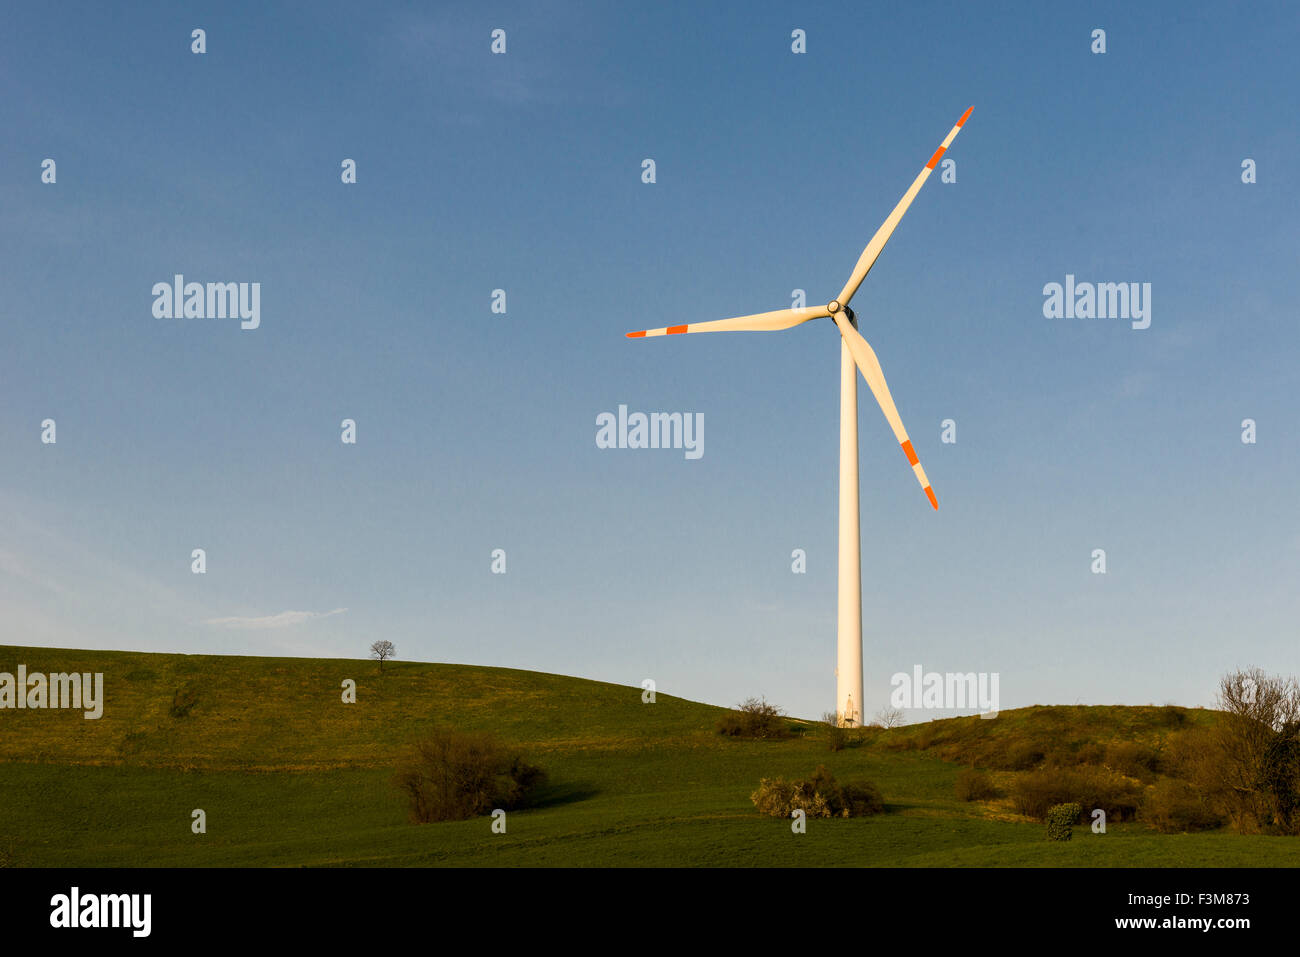 A wind power plant is in use in a hilly landscape Stock Photo